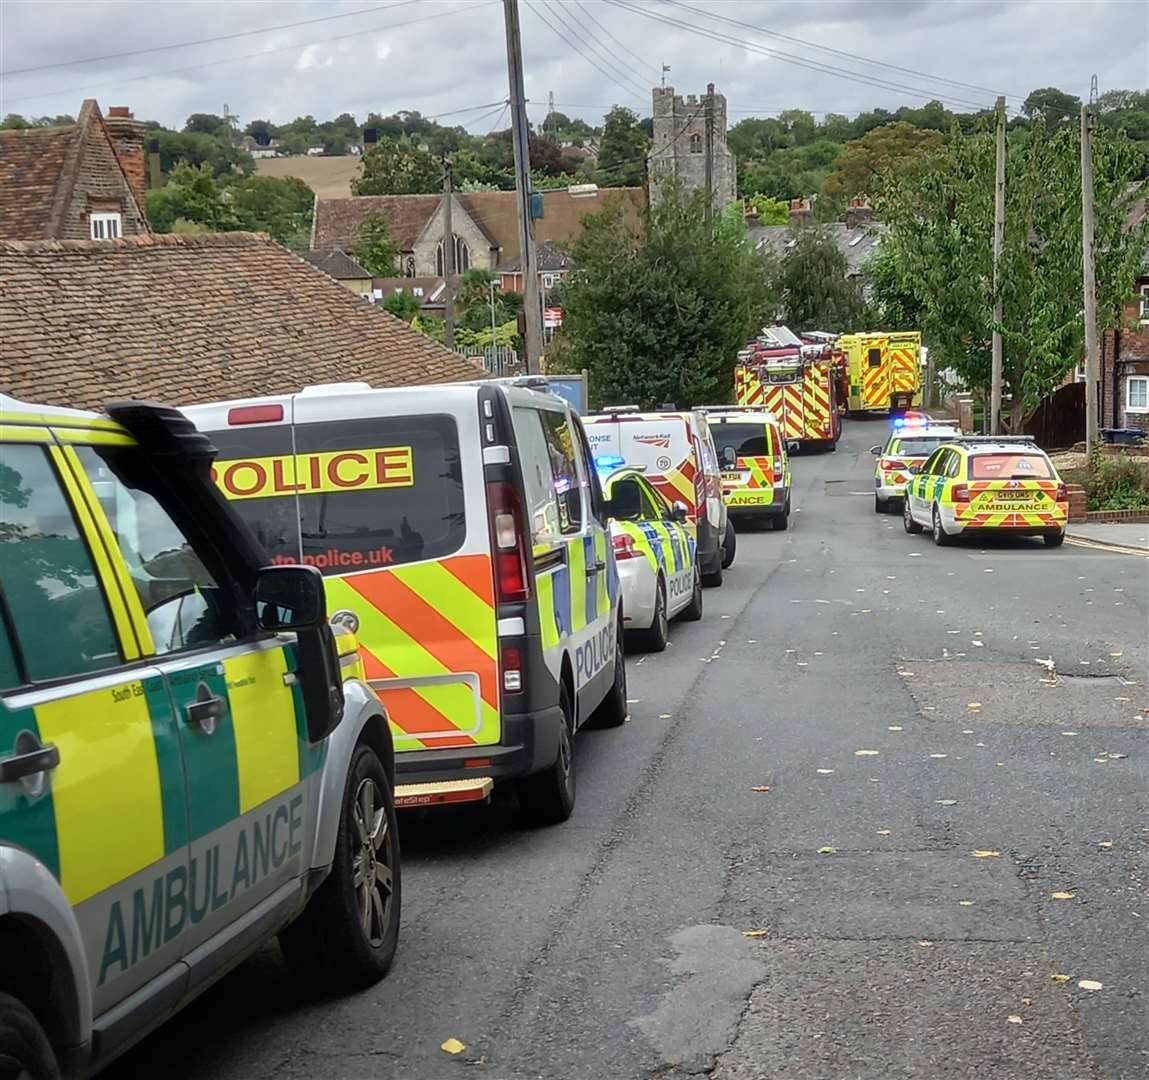 Chartham villagers say they had "never seen so many emergency vehicles" in one place